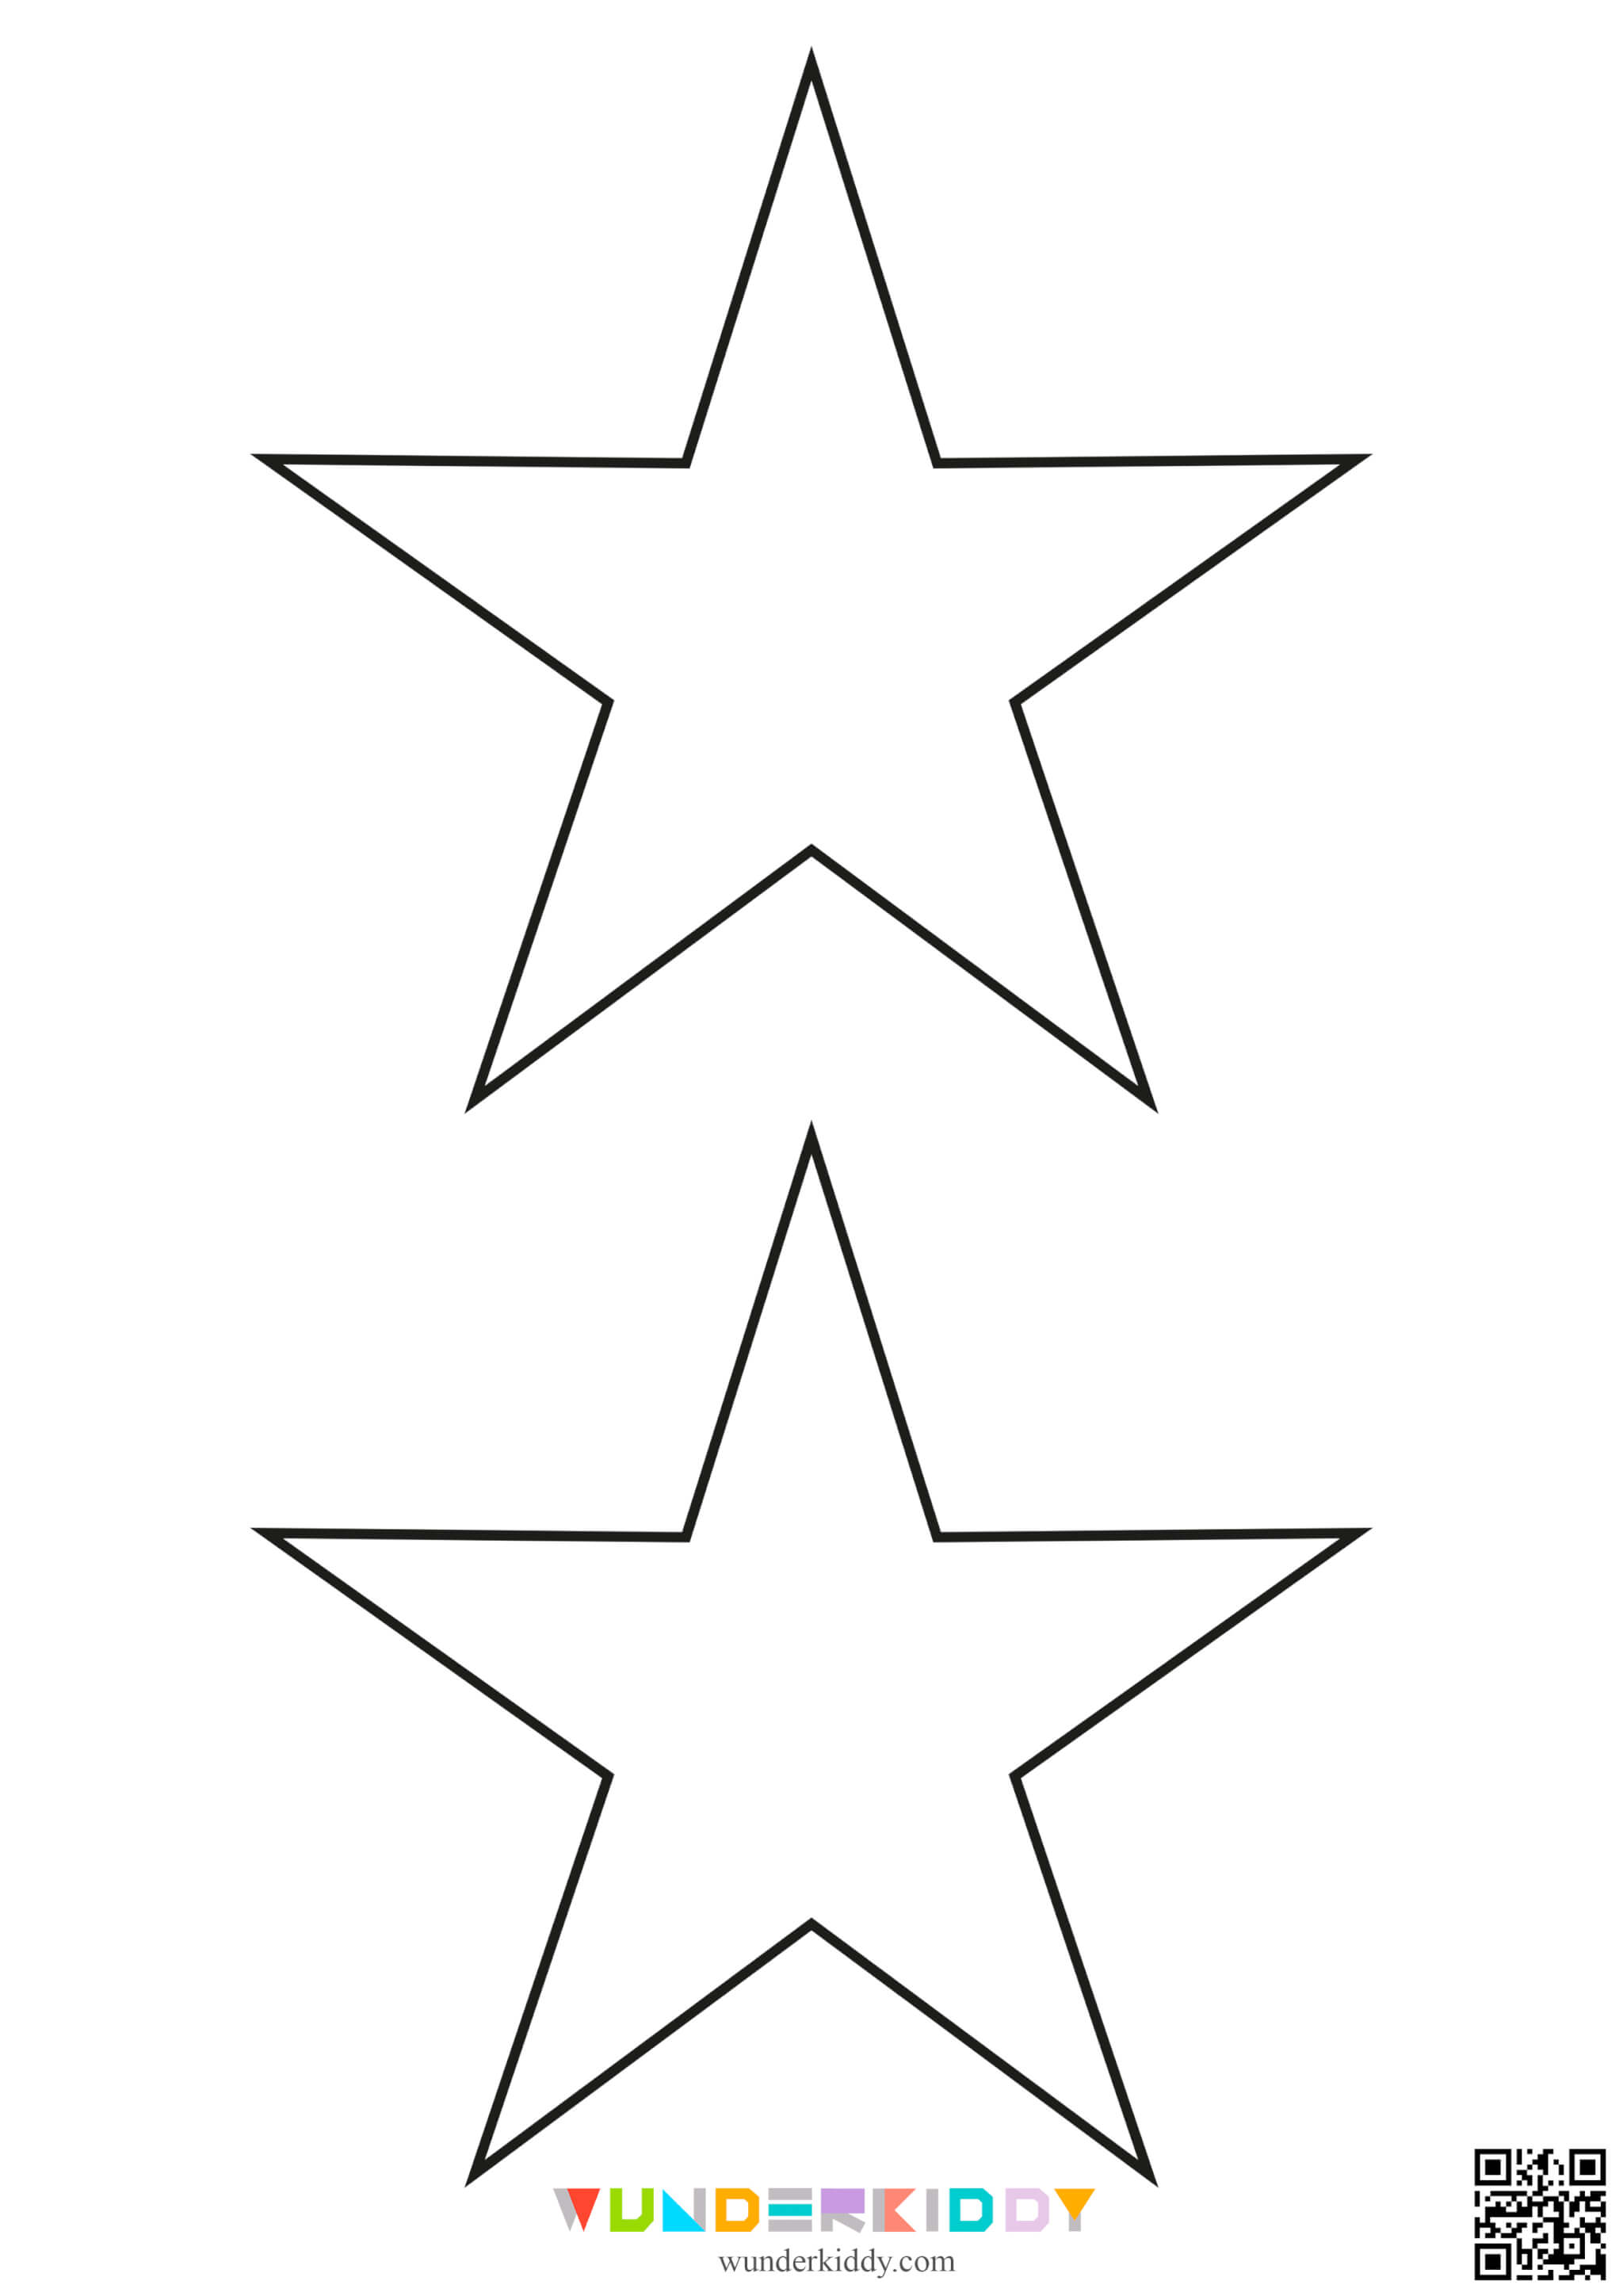 Star Outlines Templates - Image 5